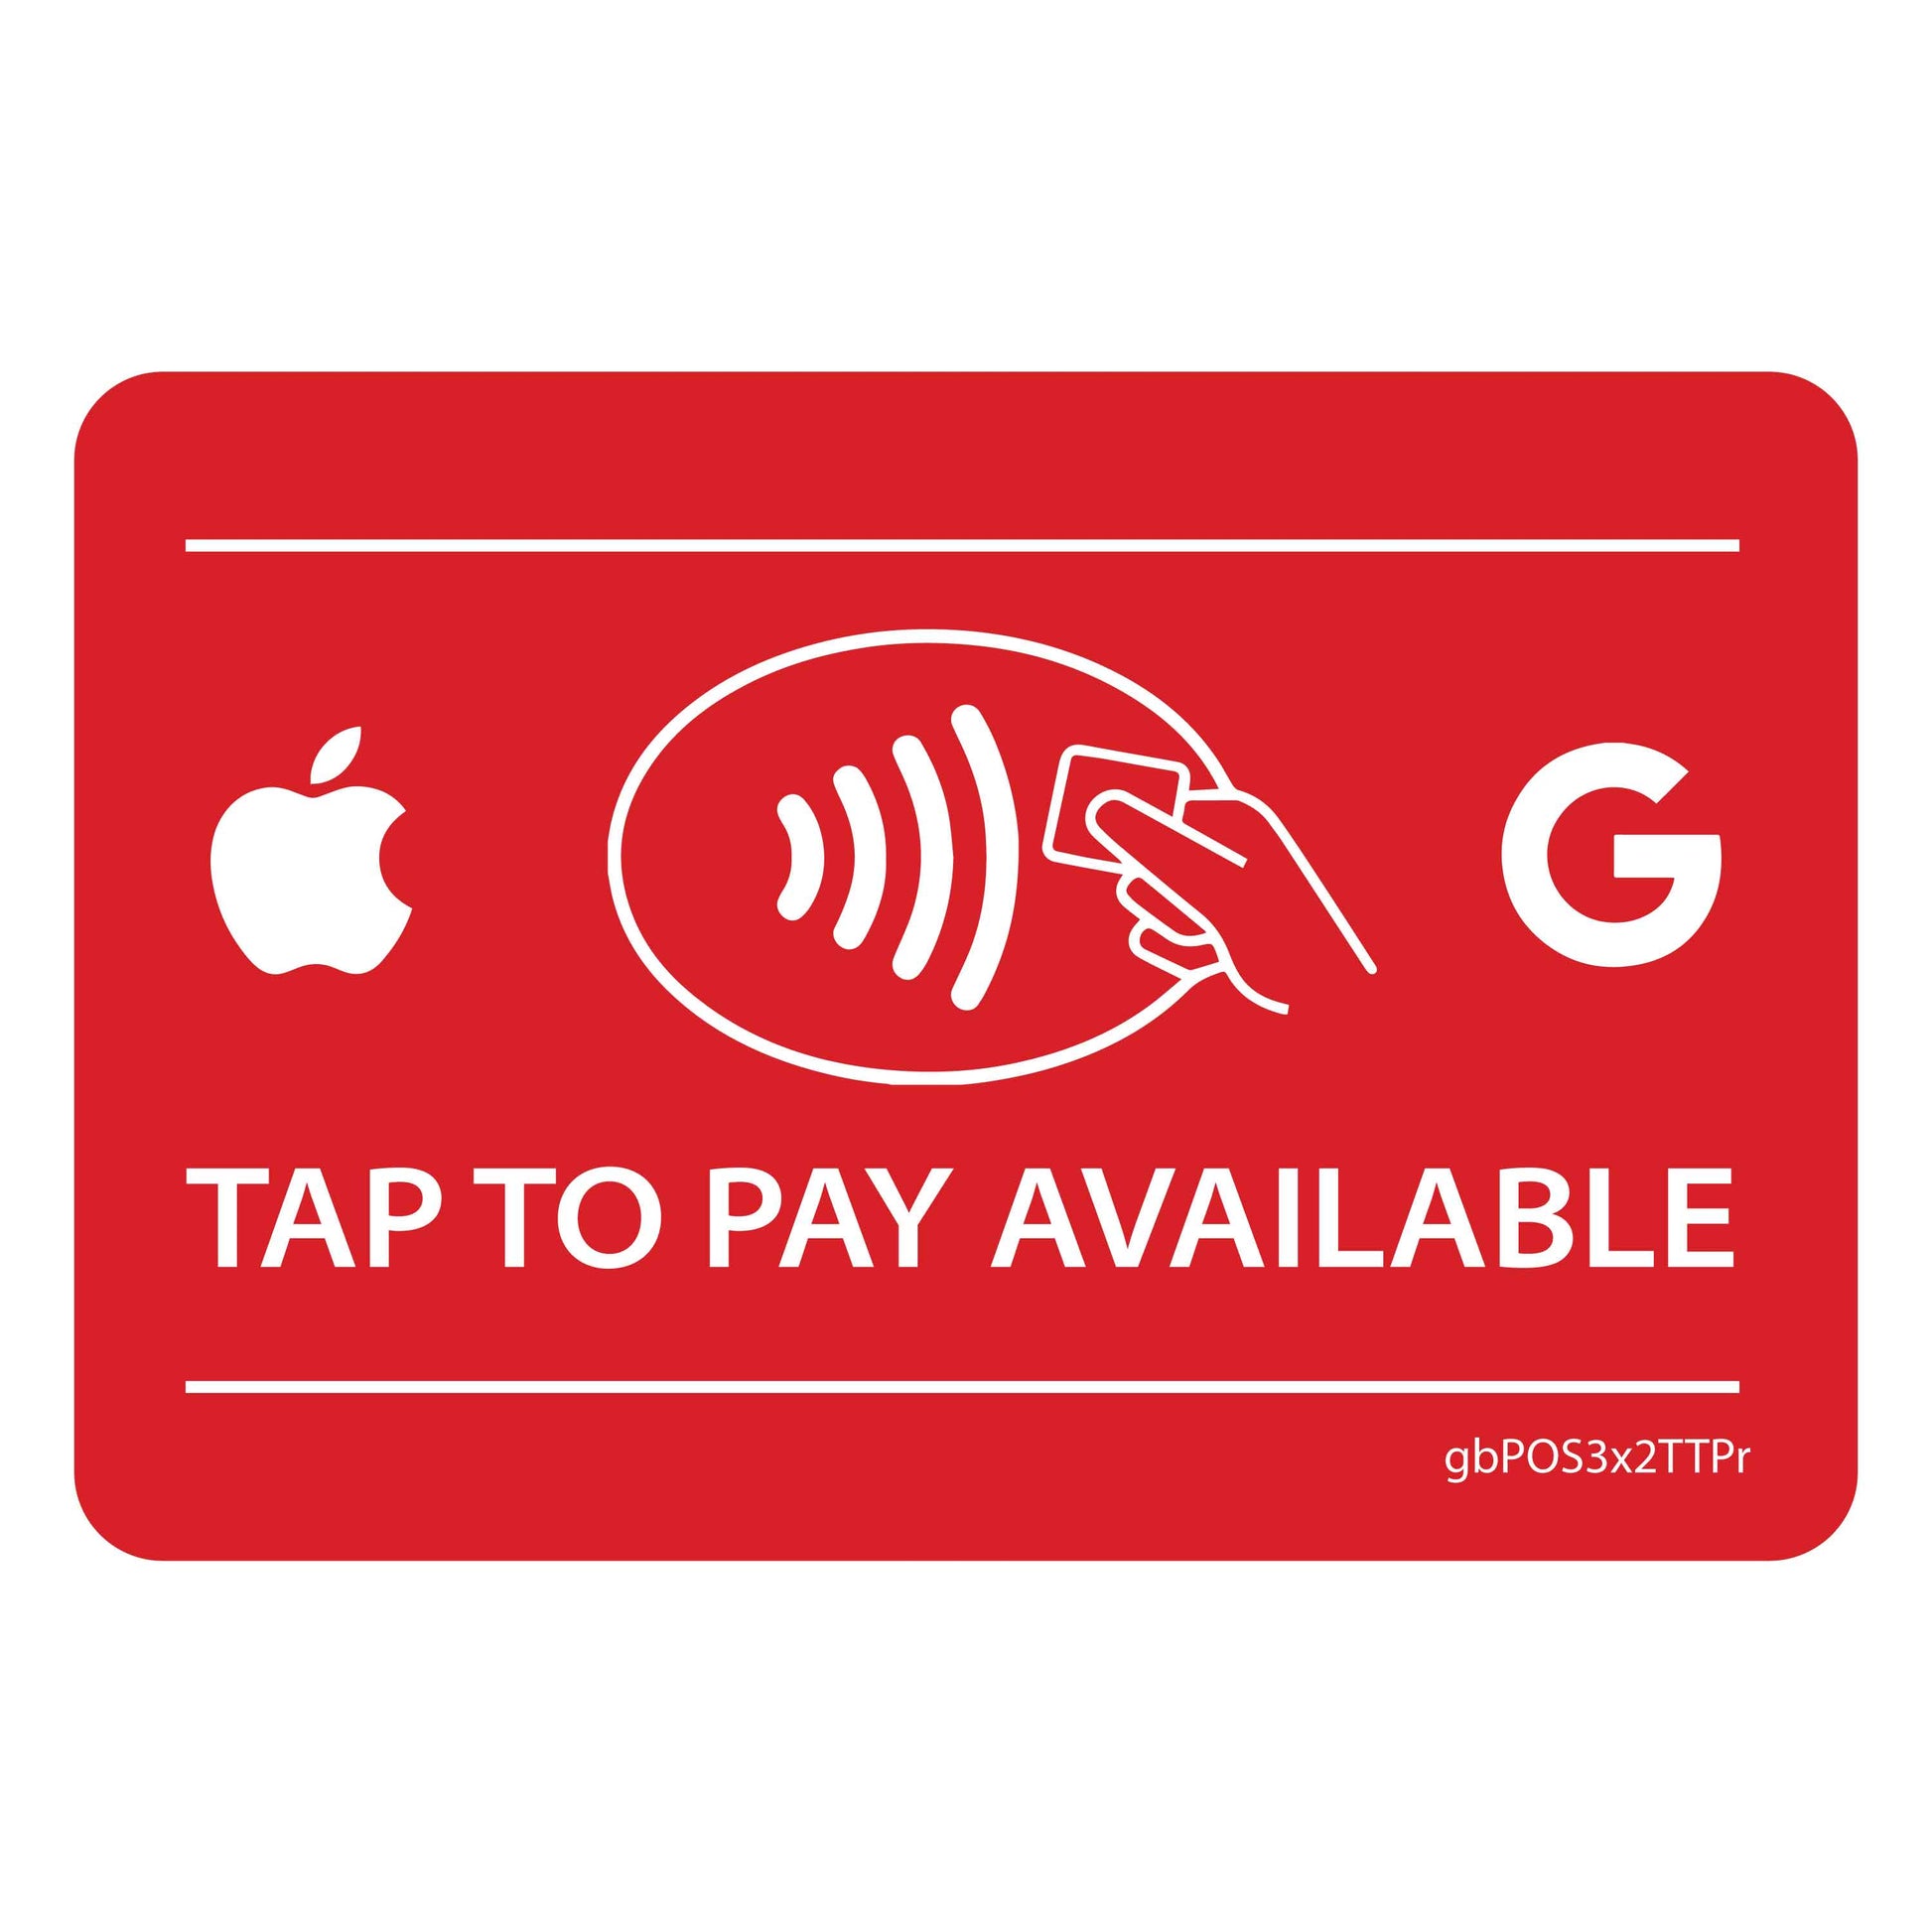 Tap to Pay Available Decal Red